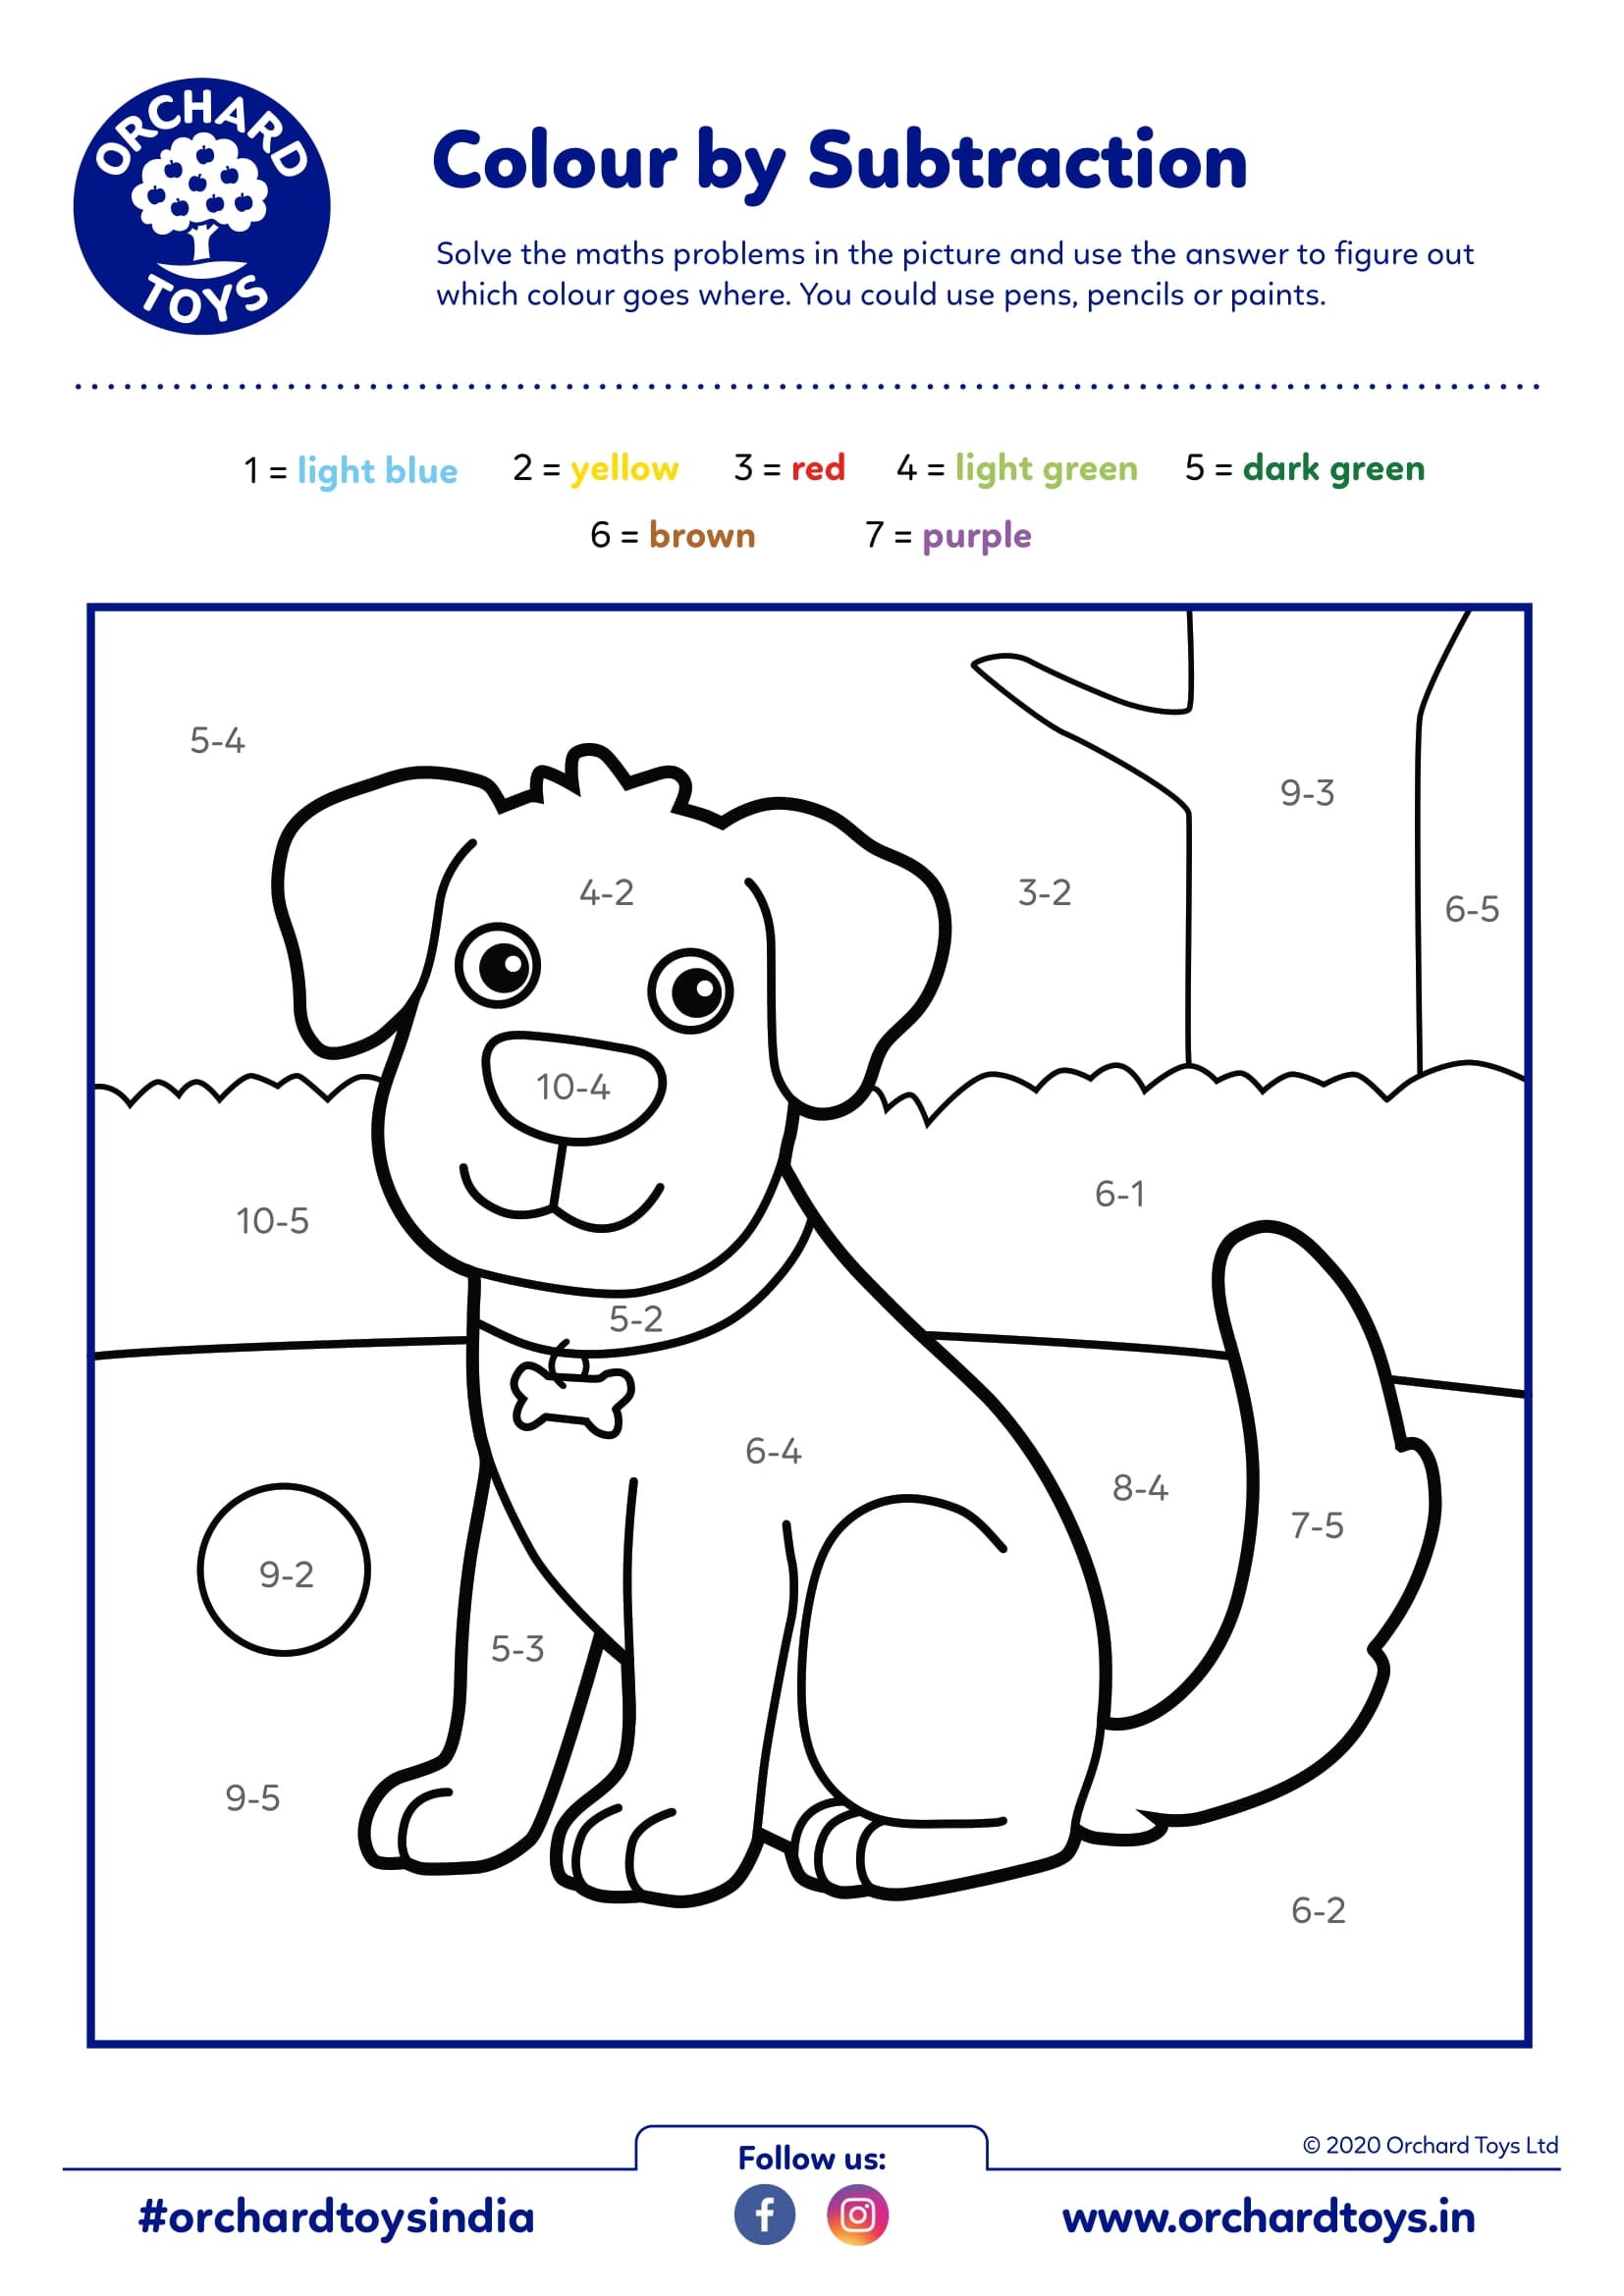 Colour by Subtraction Dog Activity Sheet